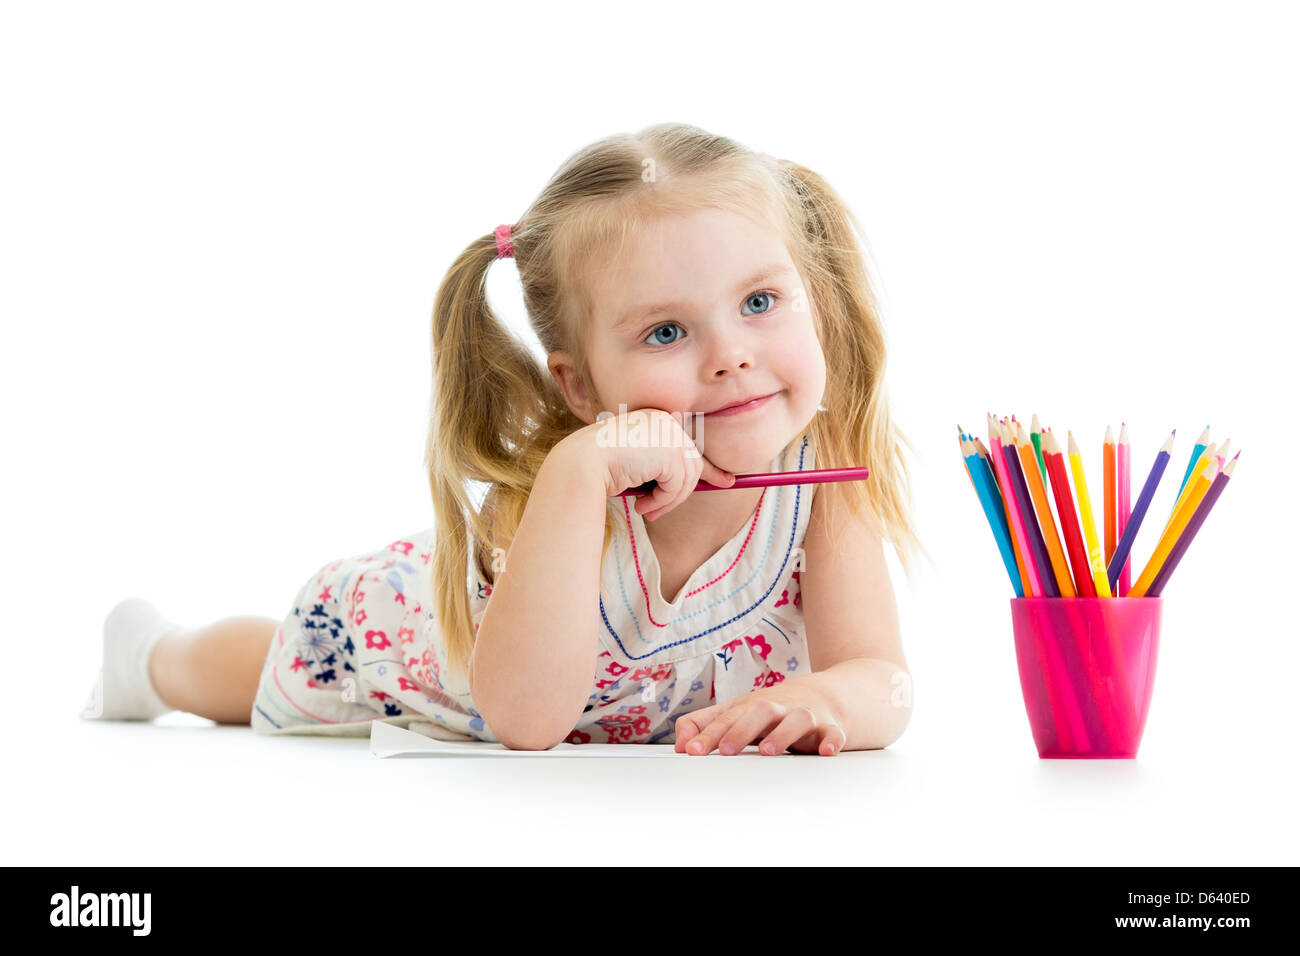 kid girl drawing with colourful pencils Stock Photo